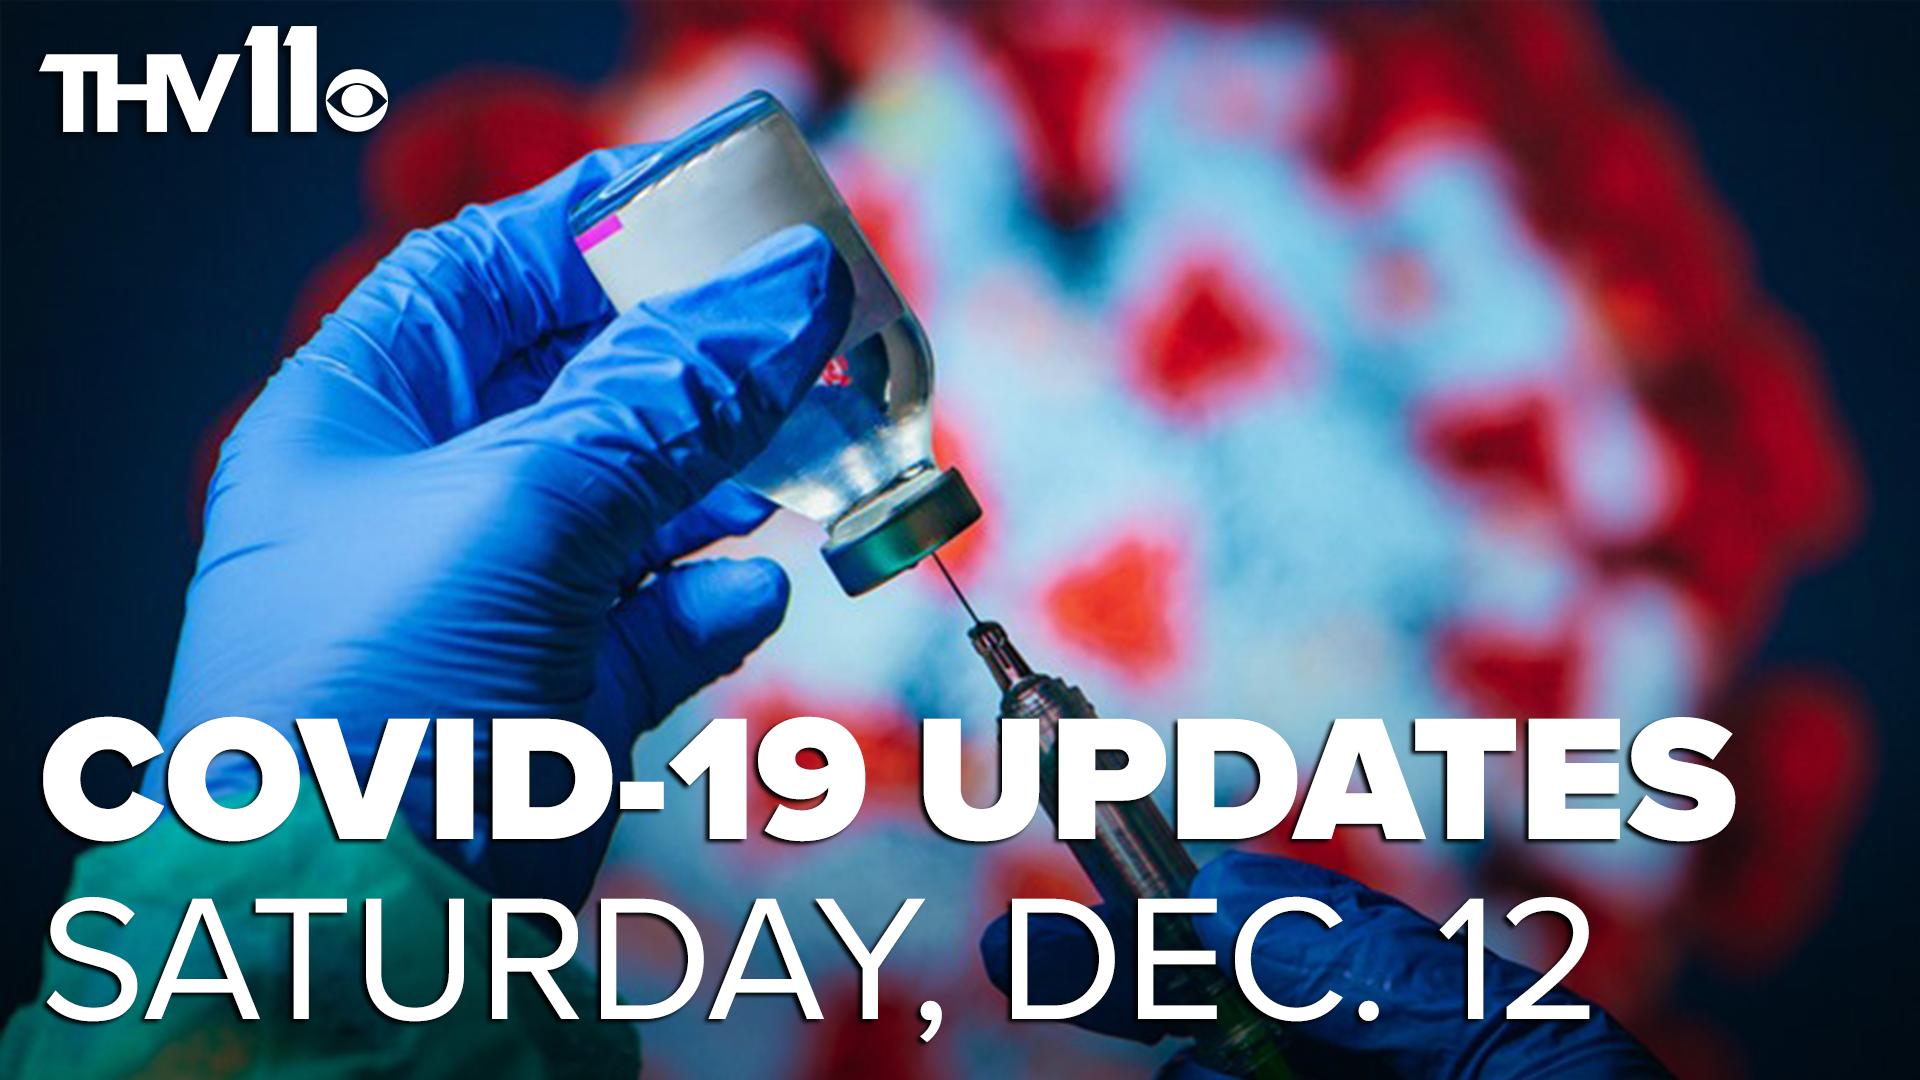 Melissa Zygowicz provides an update on the coronavirus in Arkansas for Saturday, December 12.